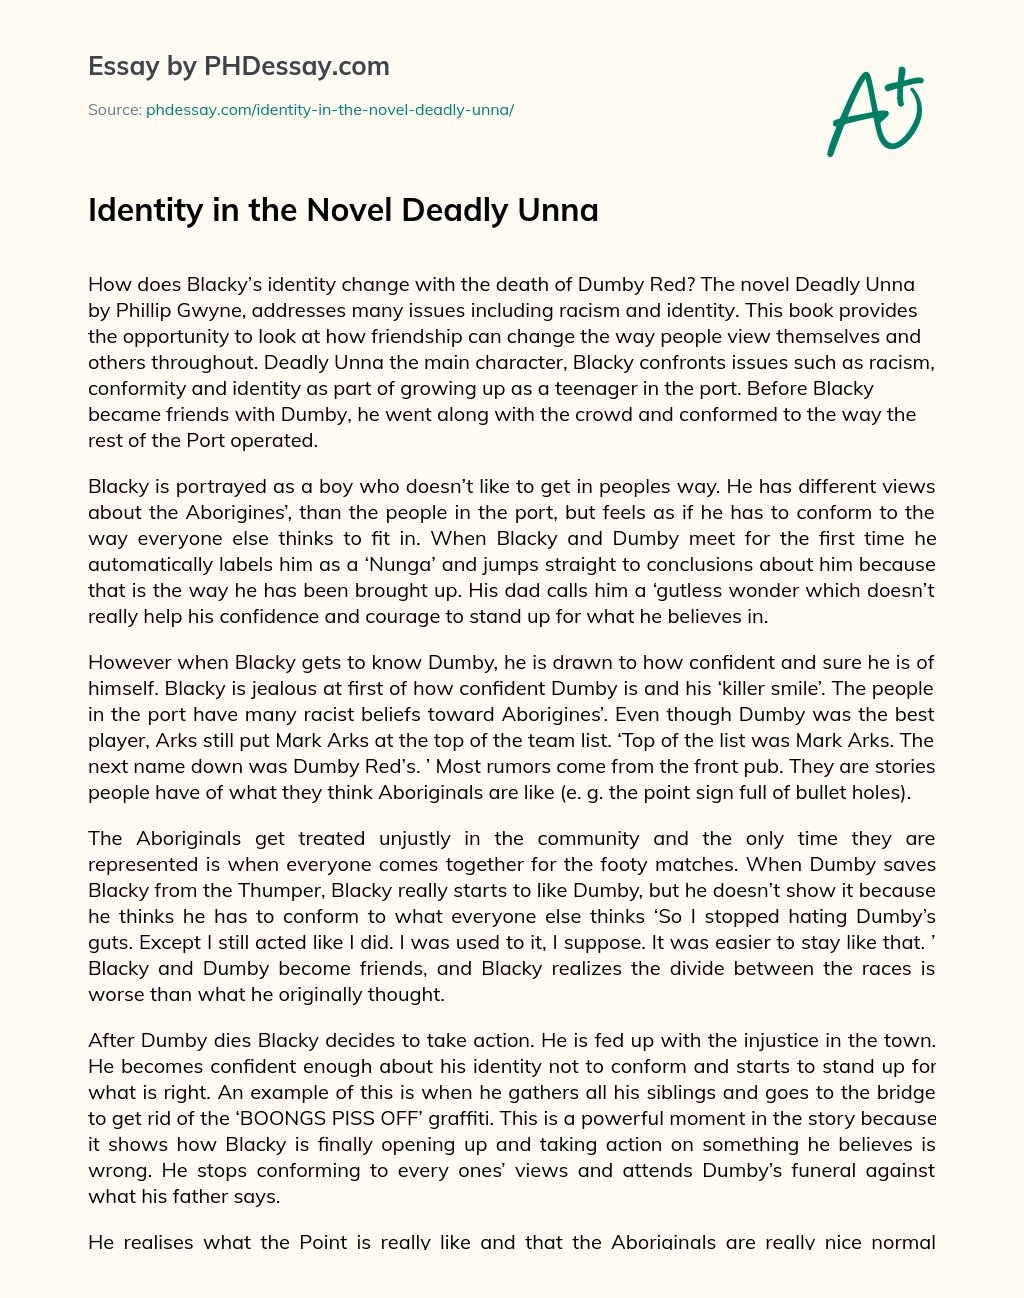 Identity in the Novel Deadly Unna essay